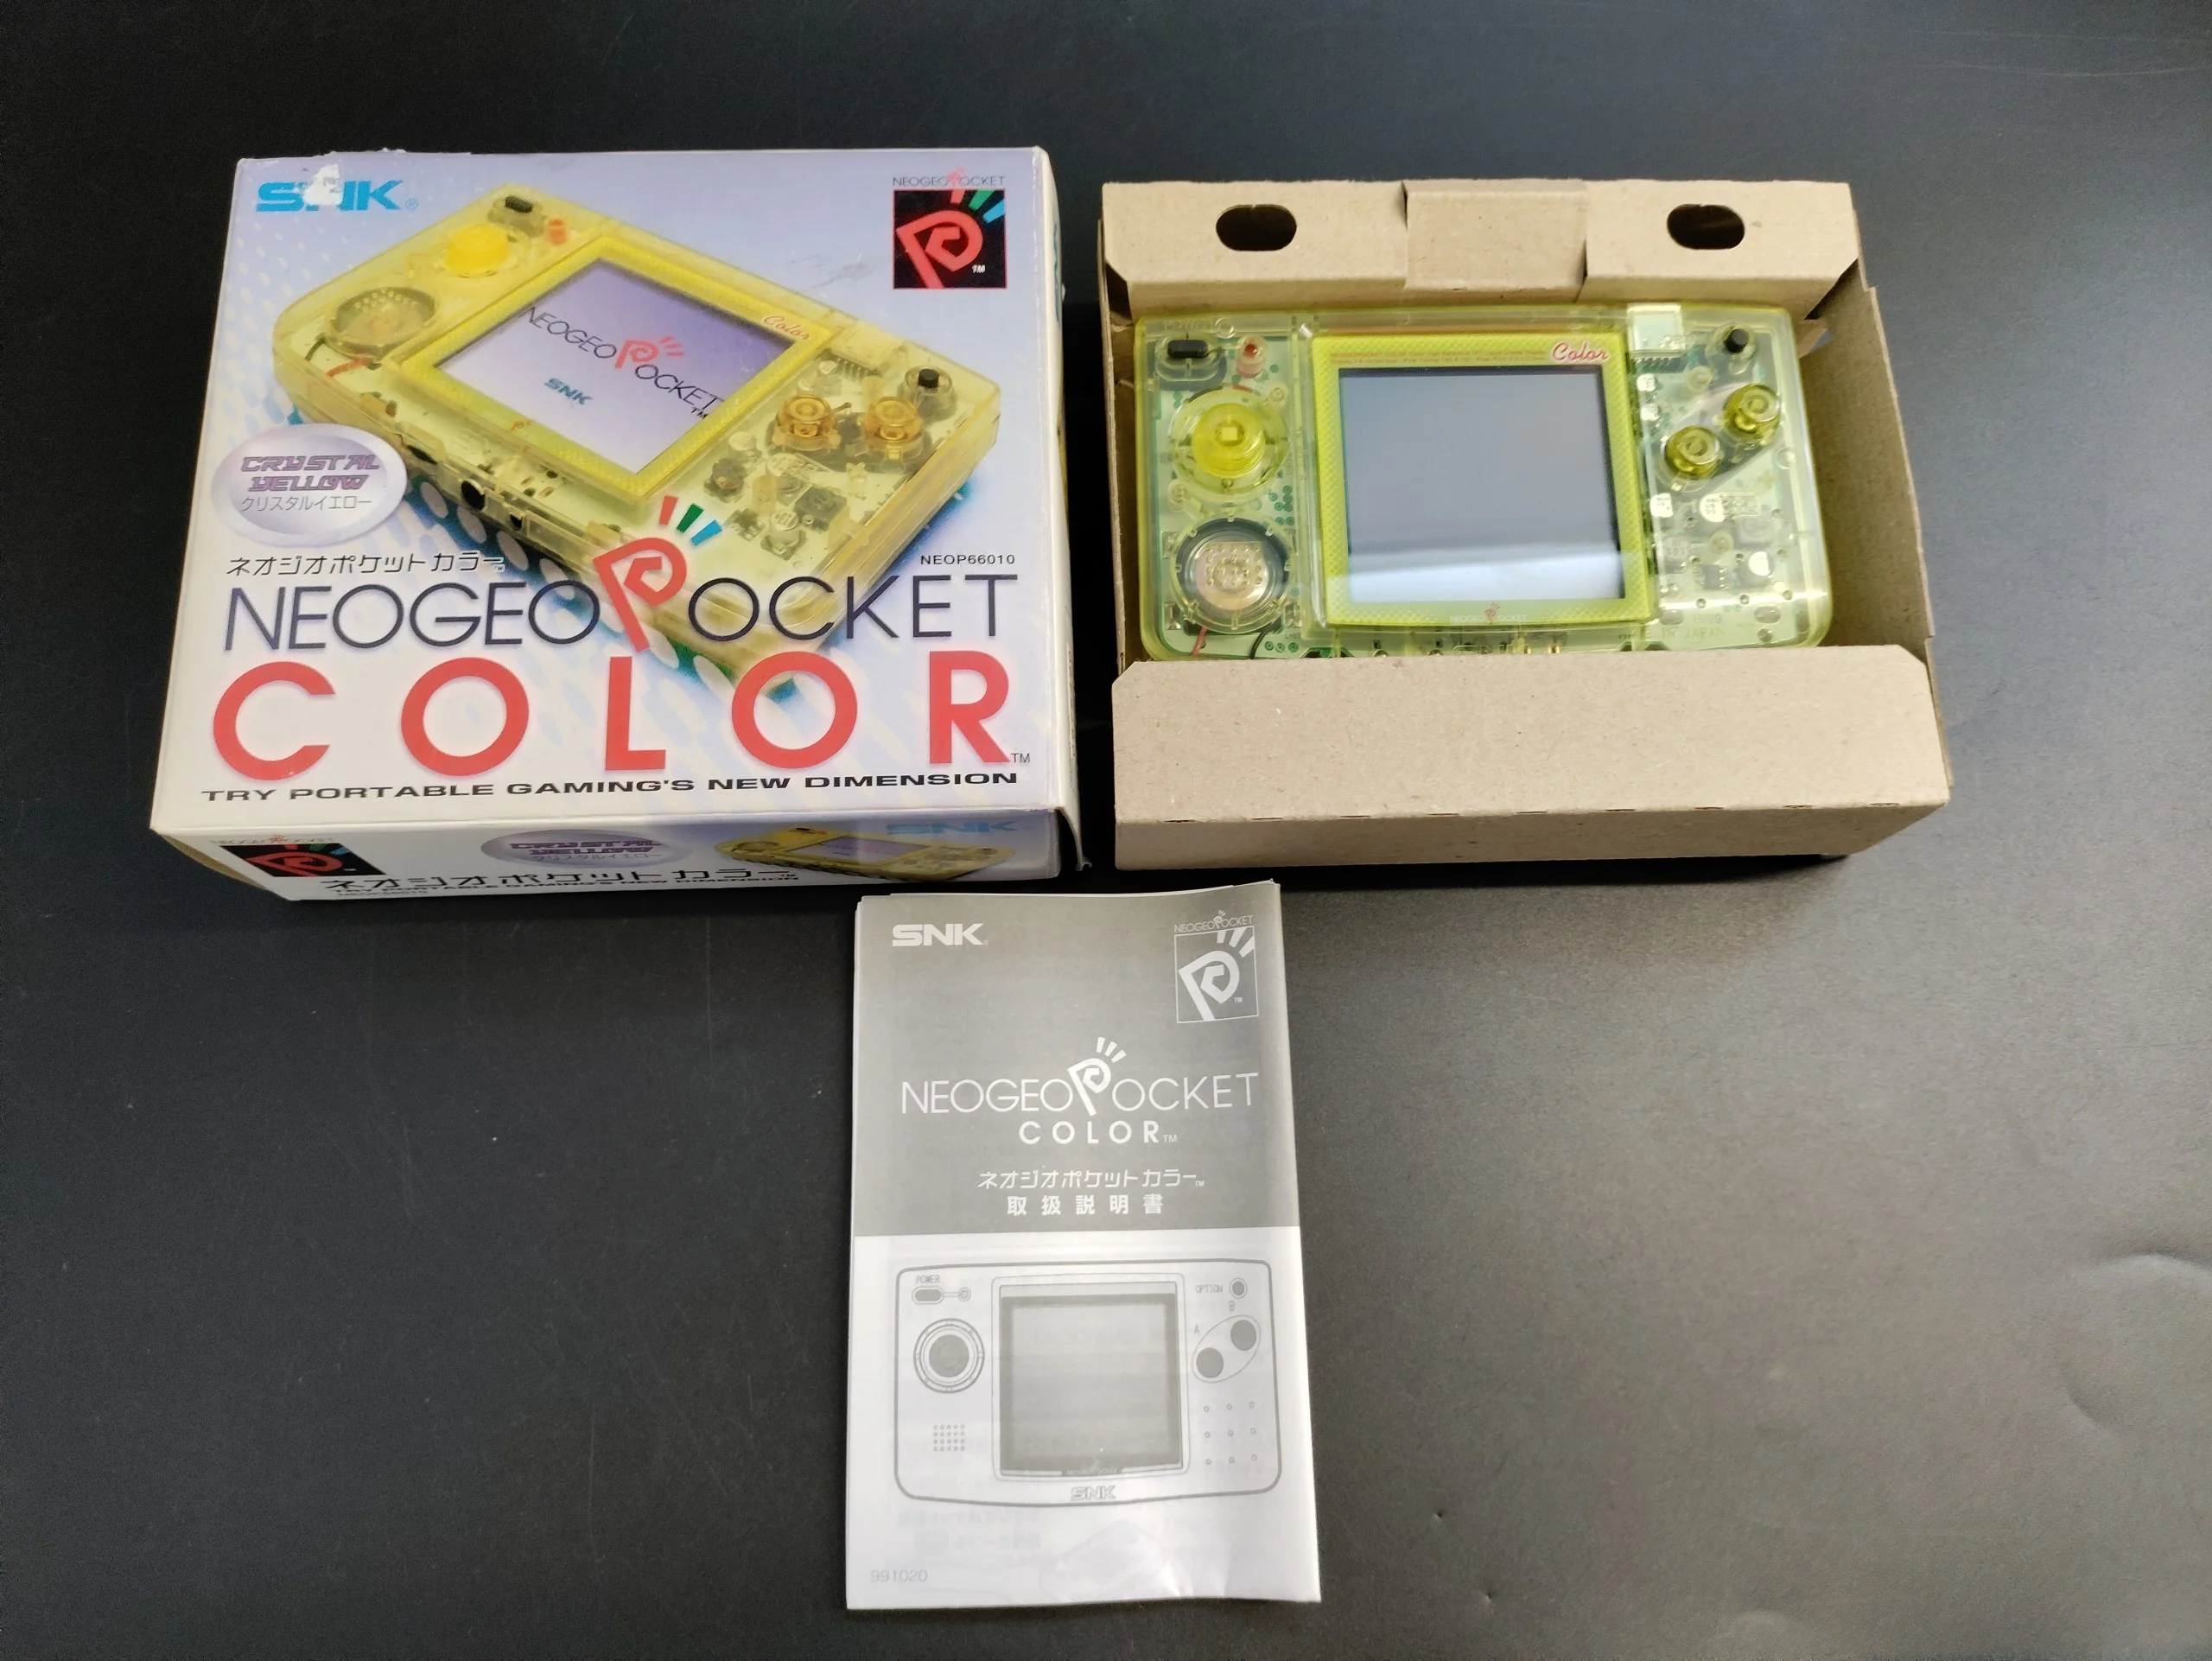  Neo Geo Pocket Color Crystal Yellow Console